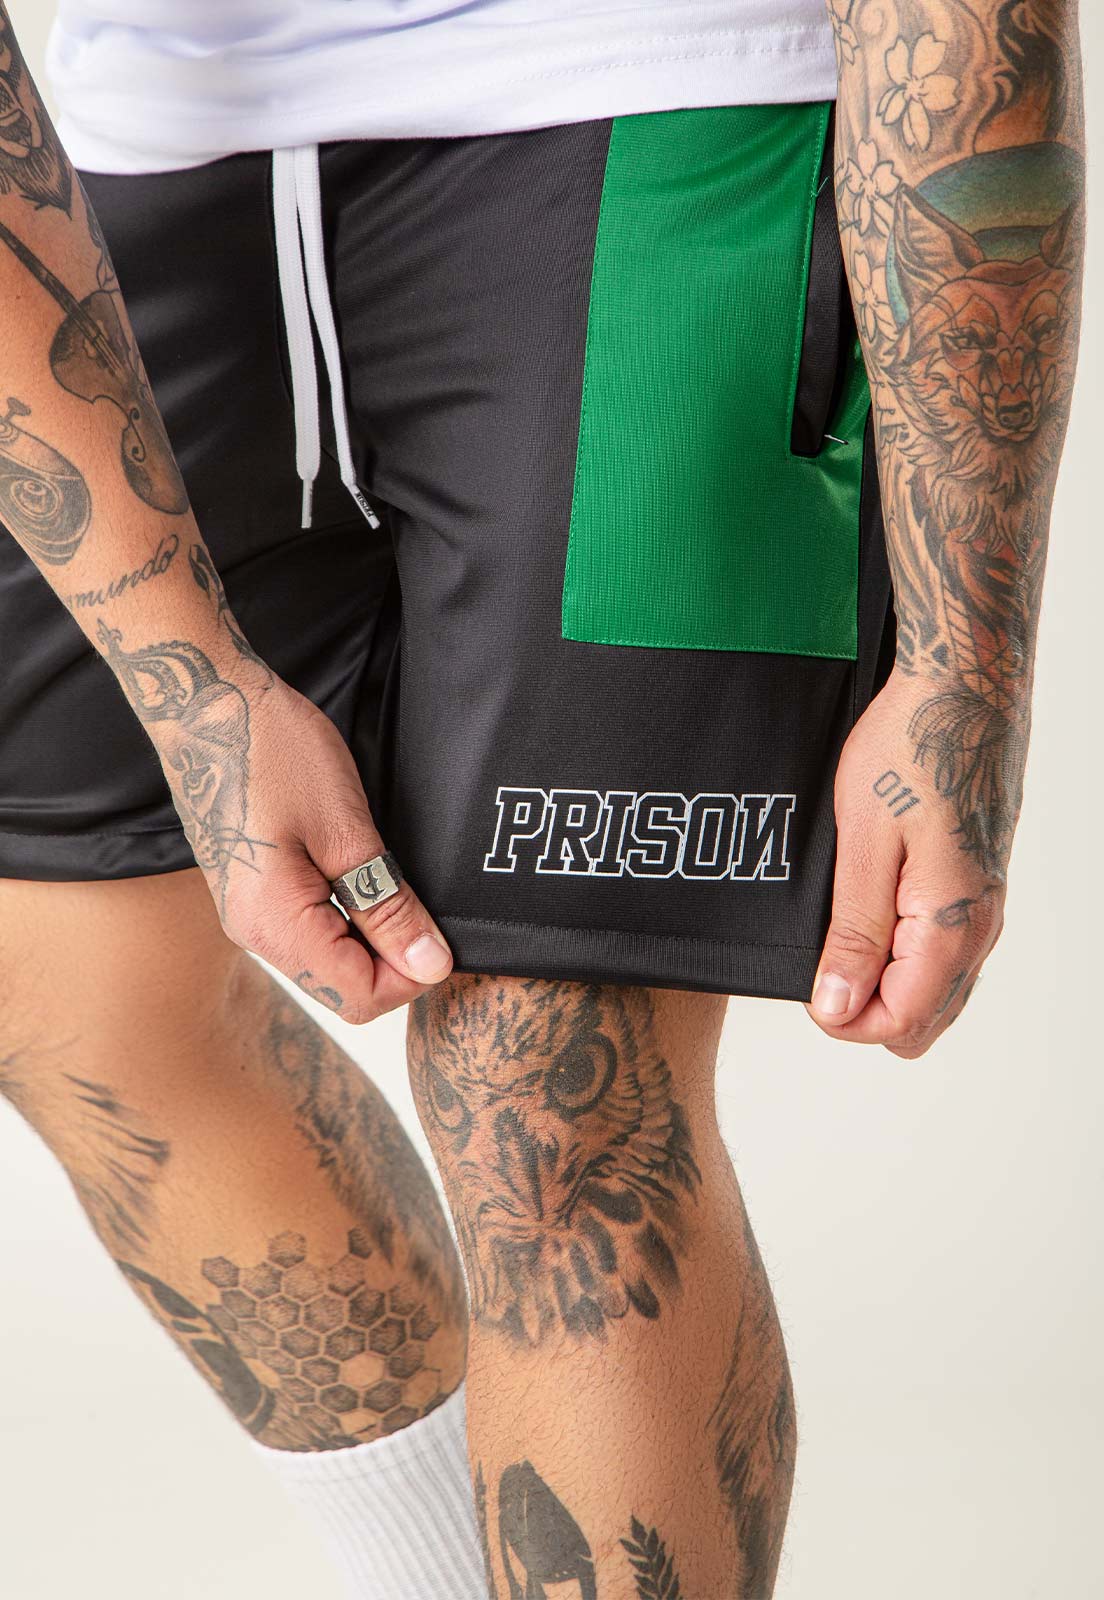 Short Sportwear Prison Cutout With Embossed Green